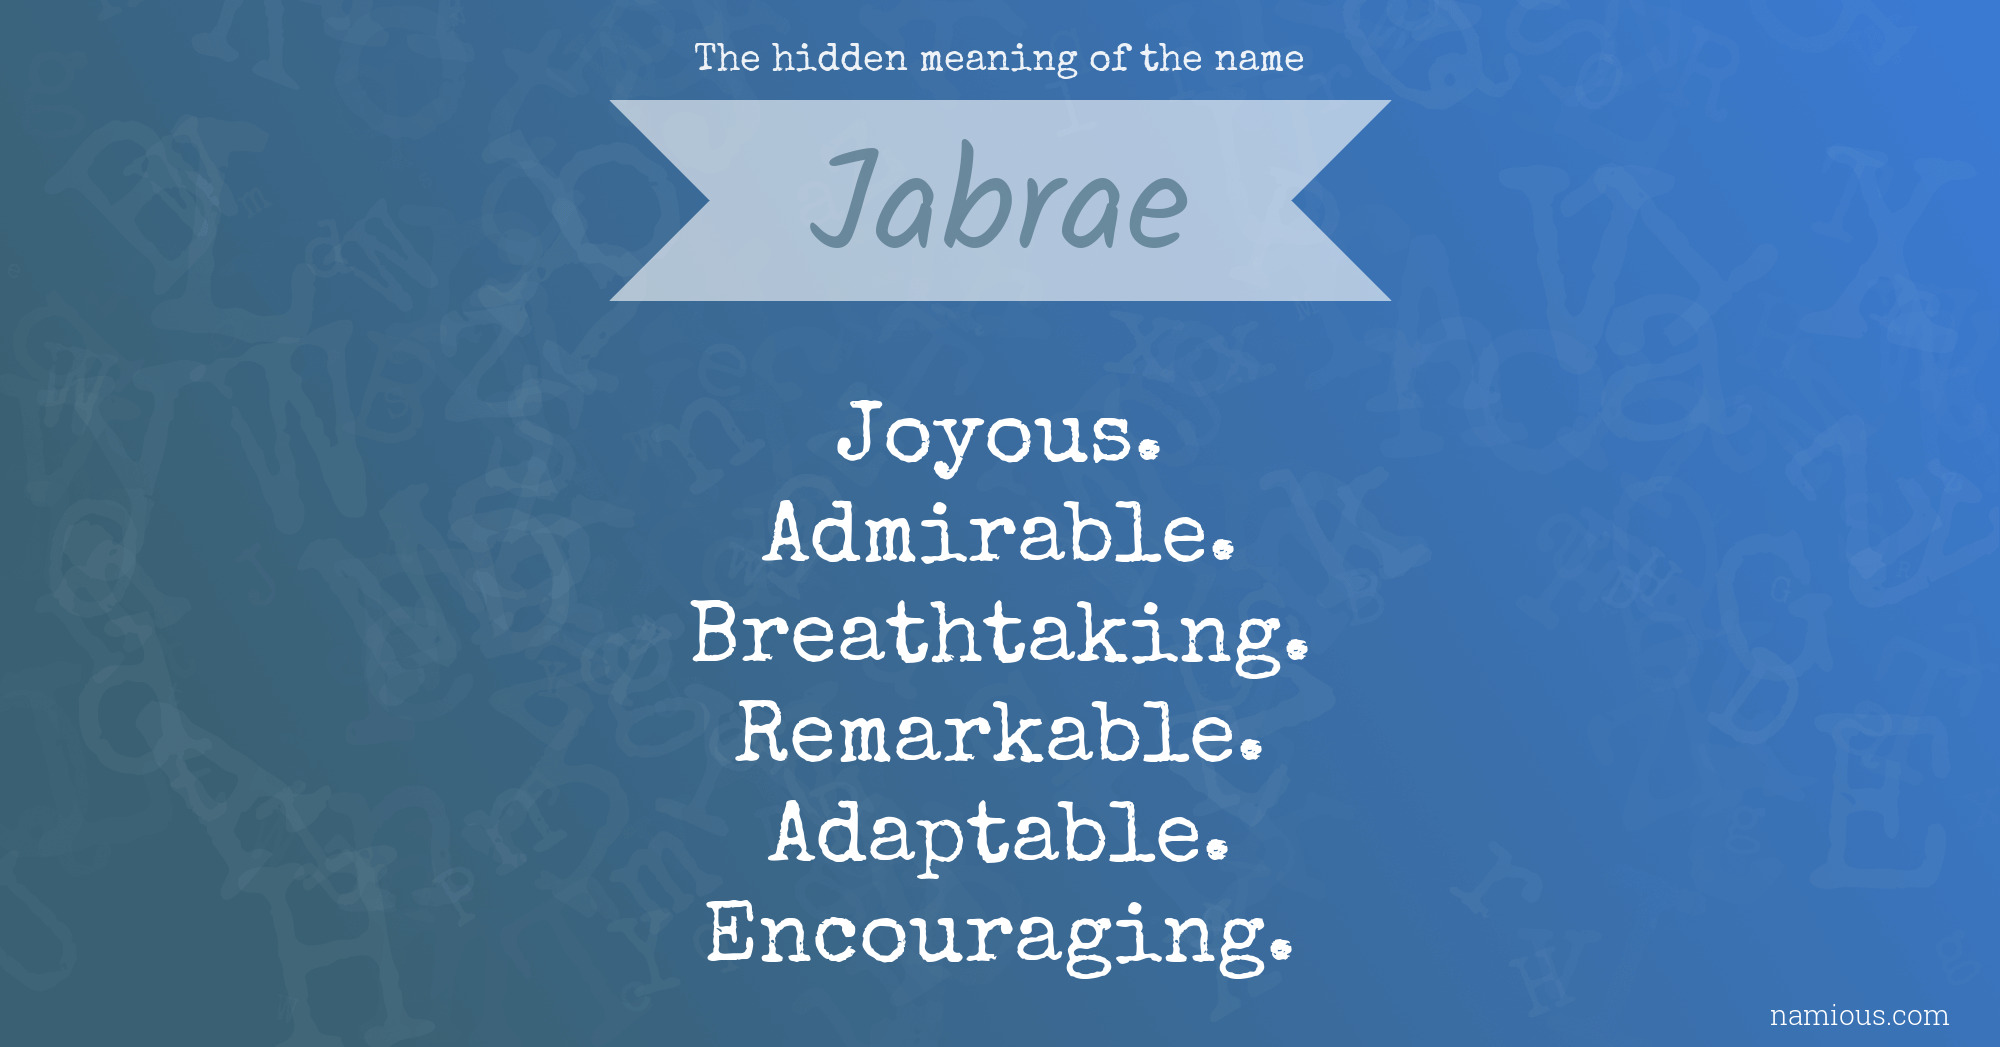 The hidden meaning of the name Jabrae